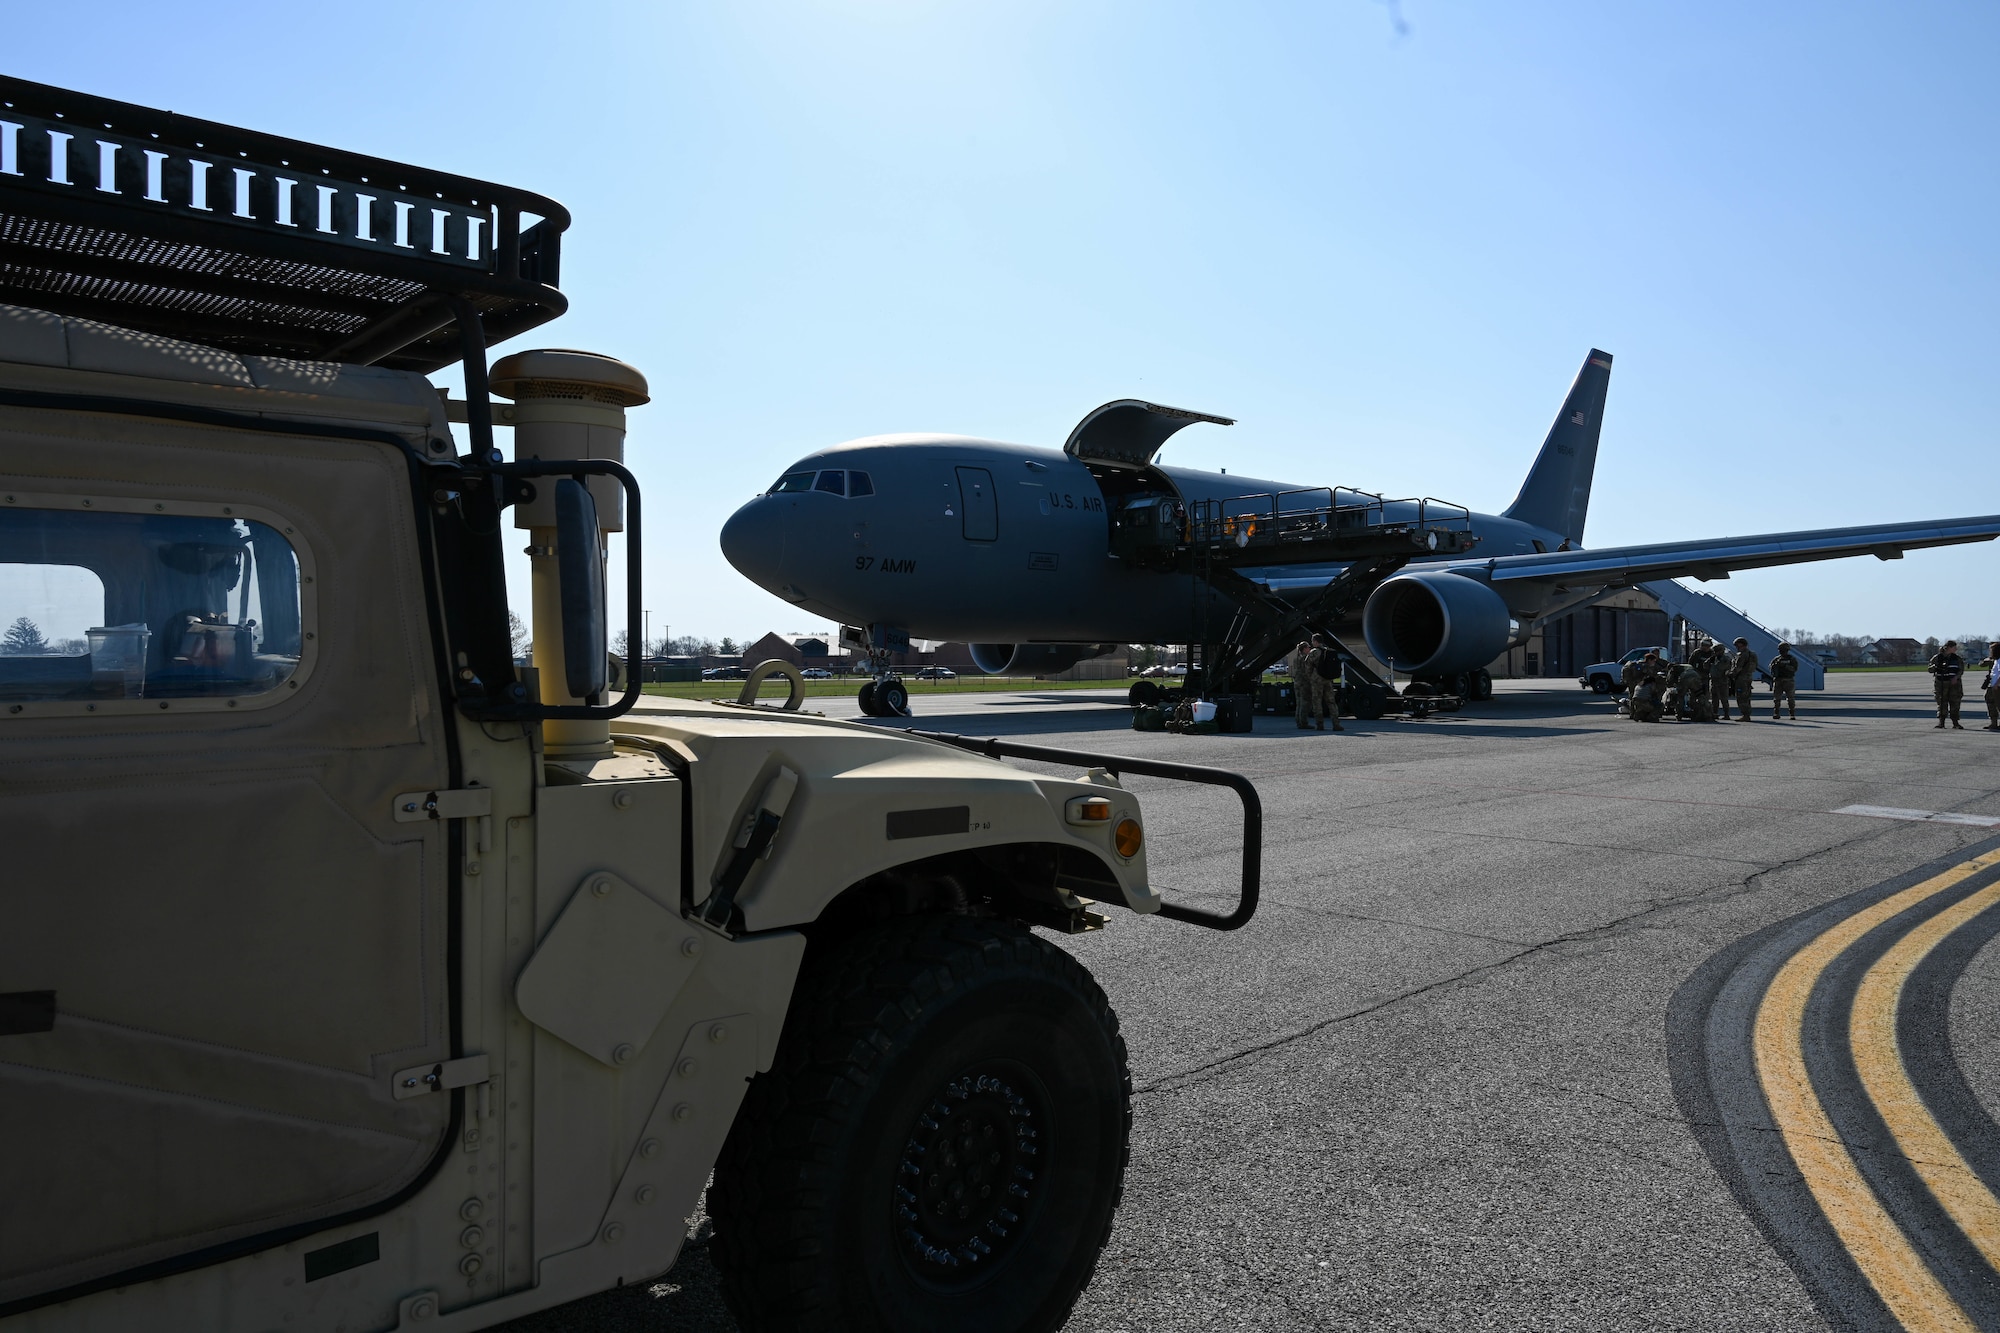 A KC-46 Pegasus from the 56th Air Refueling Squadron and a humvee from the 375th Air Mobility Wing sit on the flightline during Combat Cardinal 2024 at Scott Air Force Base, Illinois, March 13, 2024. The KC-46 added an opportunity for Aeromedical Evacuation specialists to hone their mission essential skills during the exercise. (U.S. Air Force photo by Senior Airman Trenton Jancze)